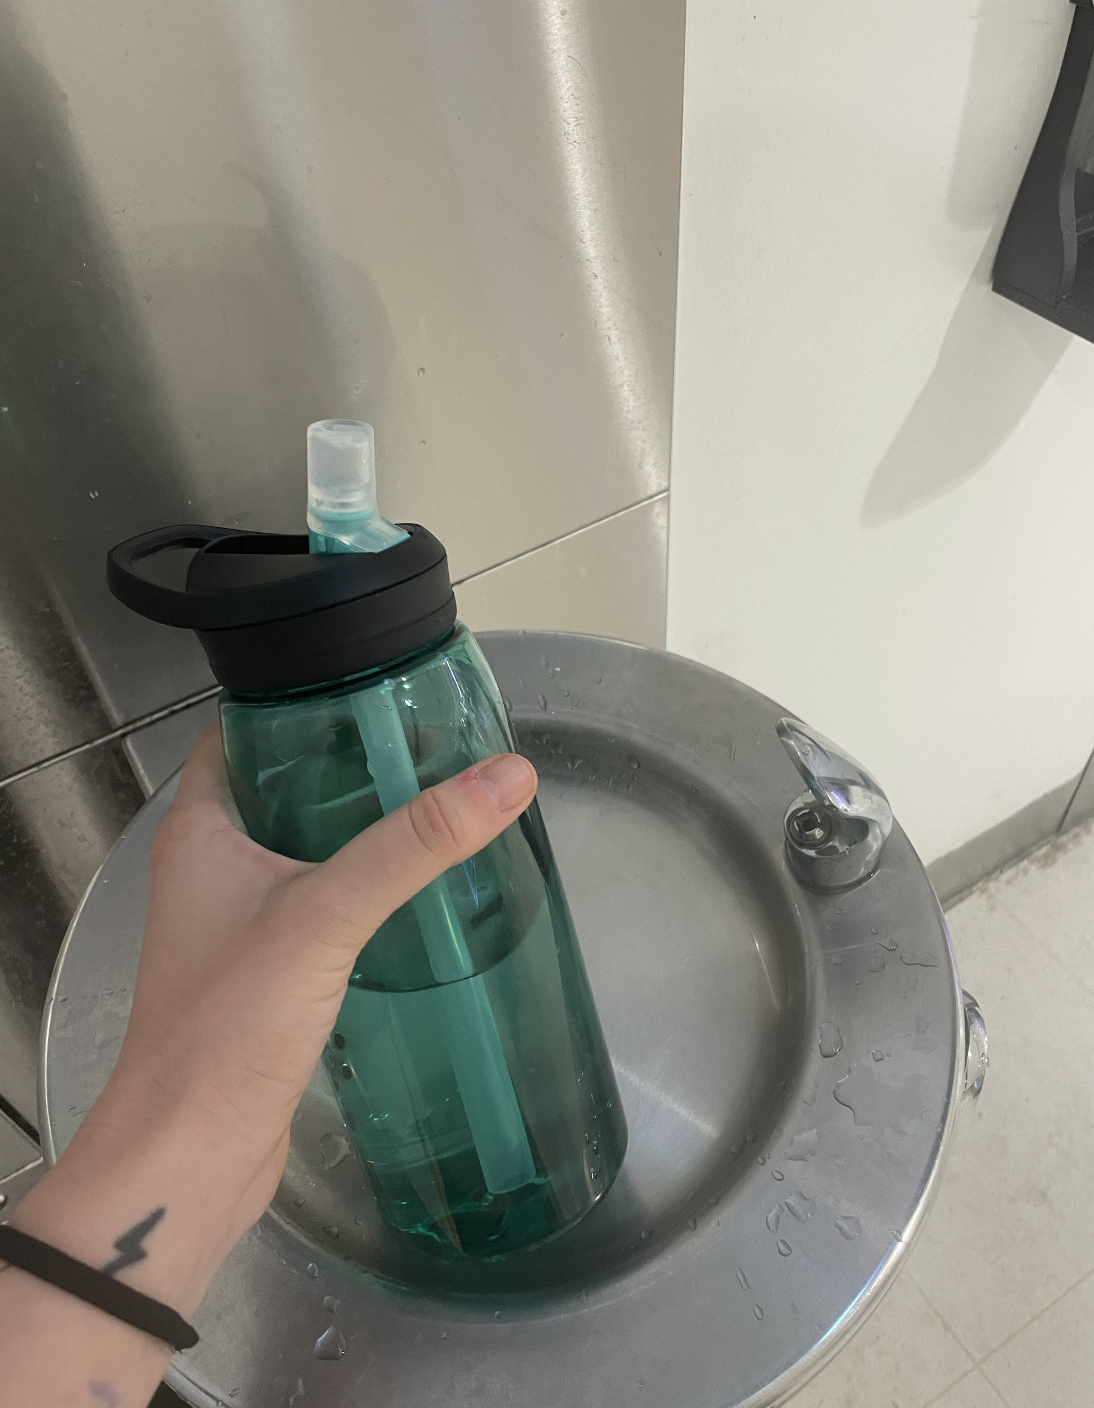 A hand holding a half-full water bottle in front of a drinking fountain